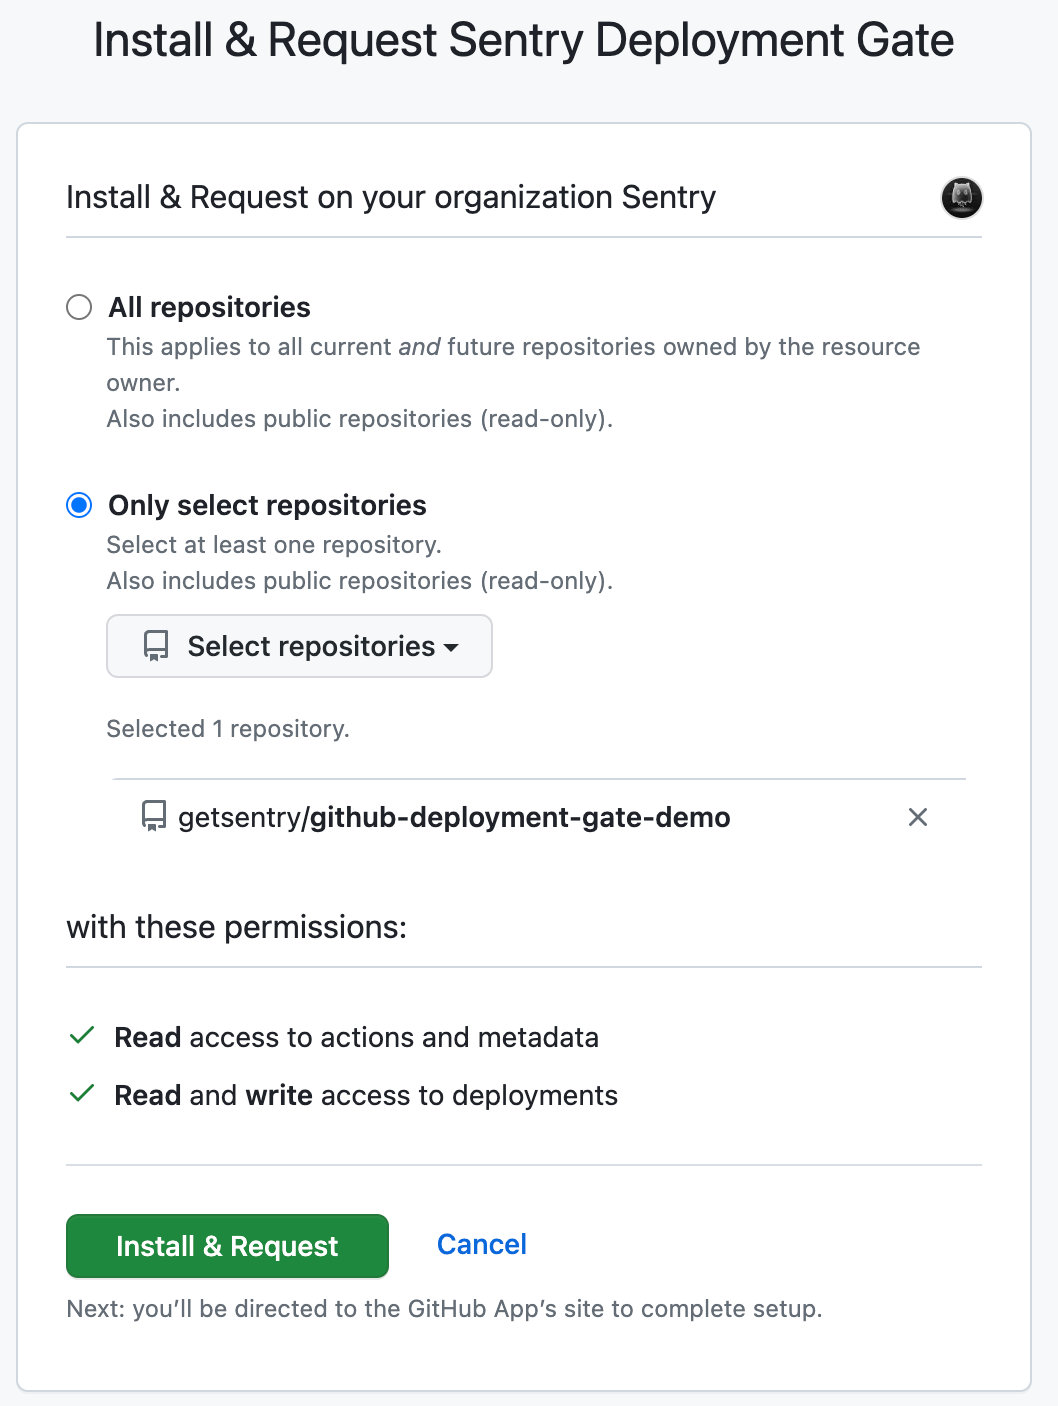 Select repositories